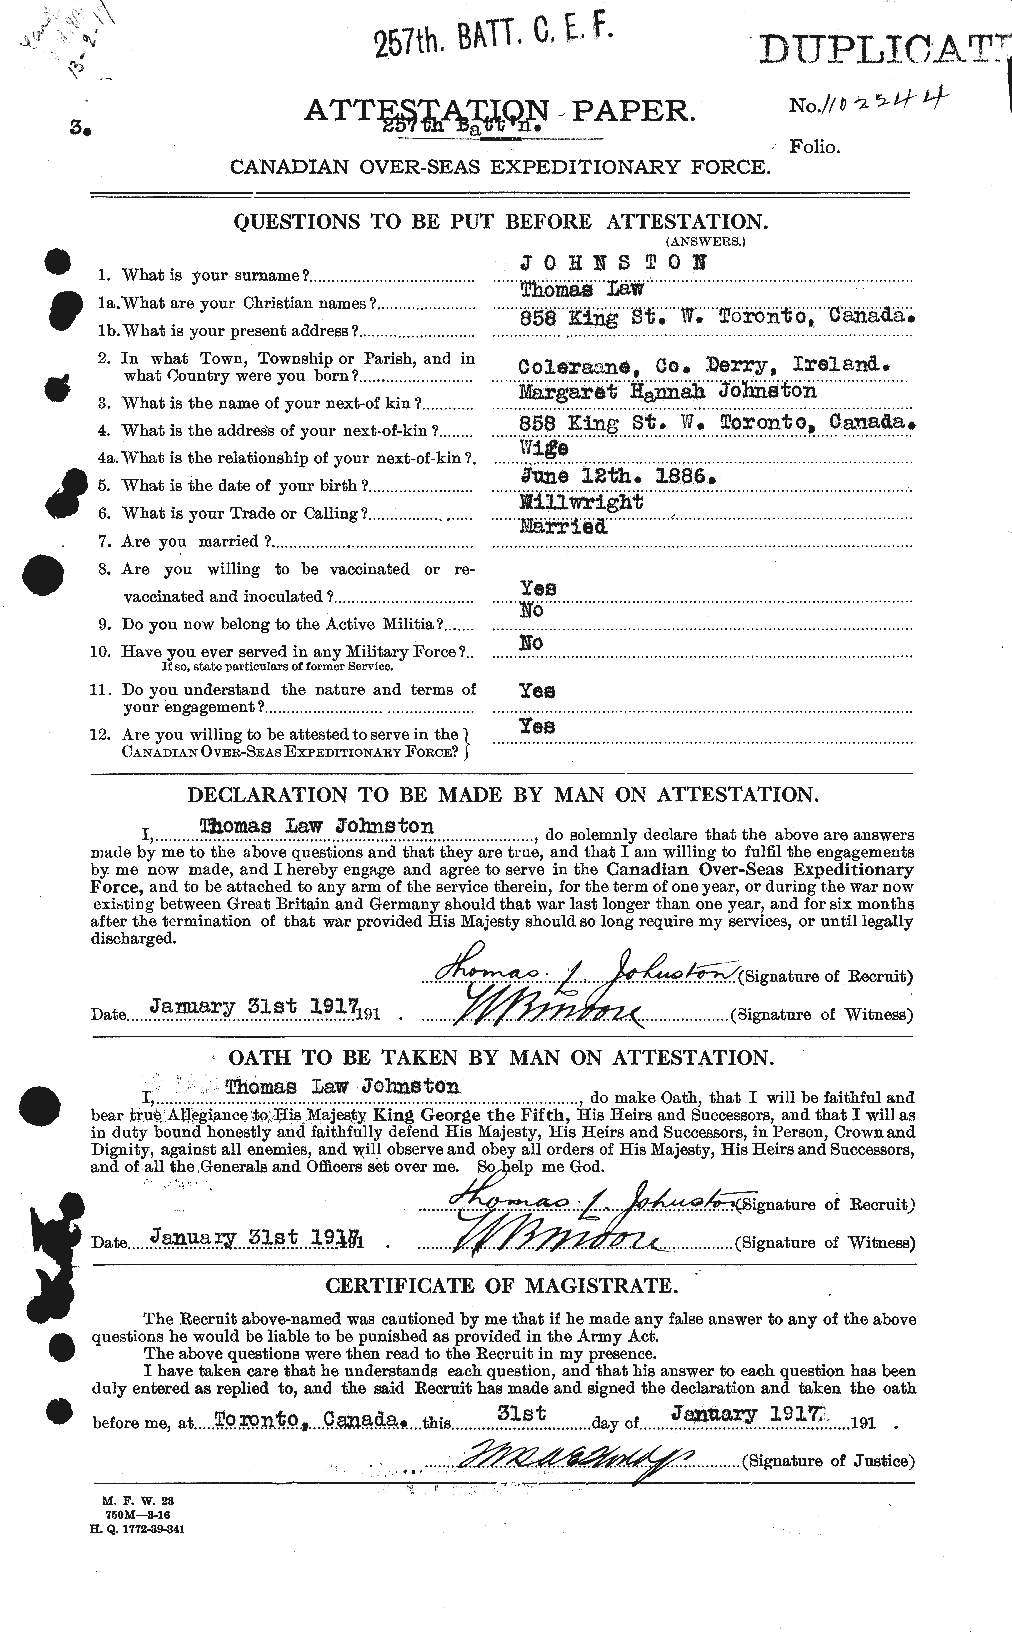 Personnel Records of the First World War - CEF 427172a